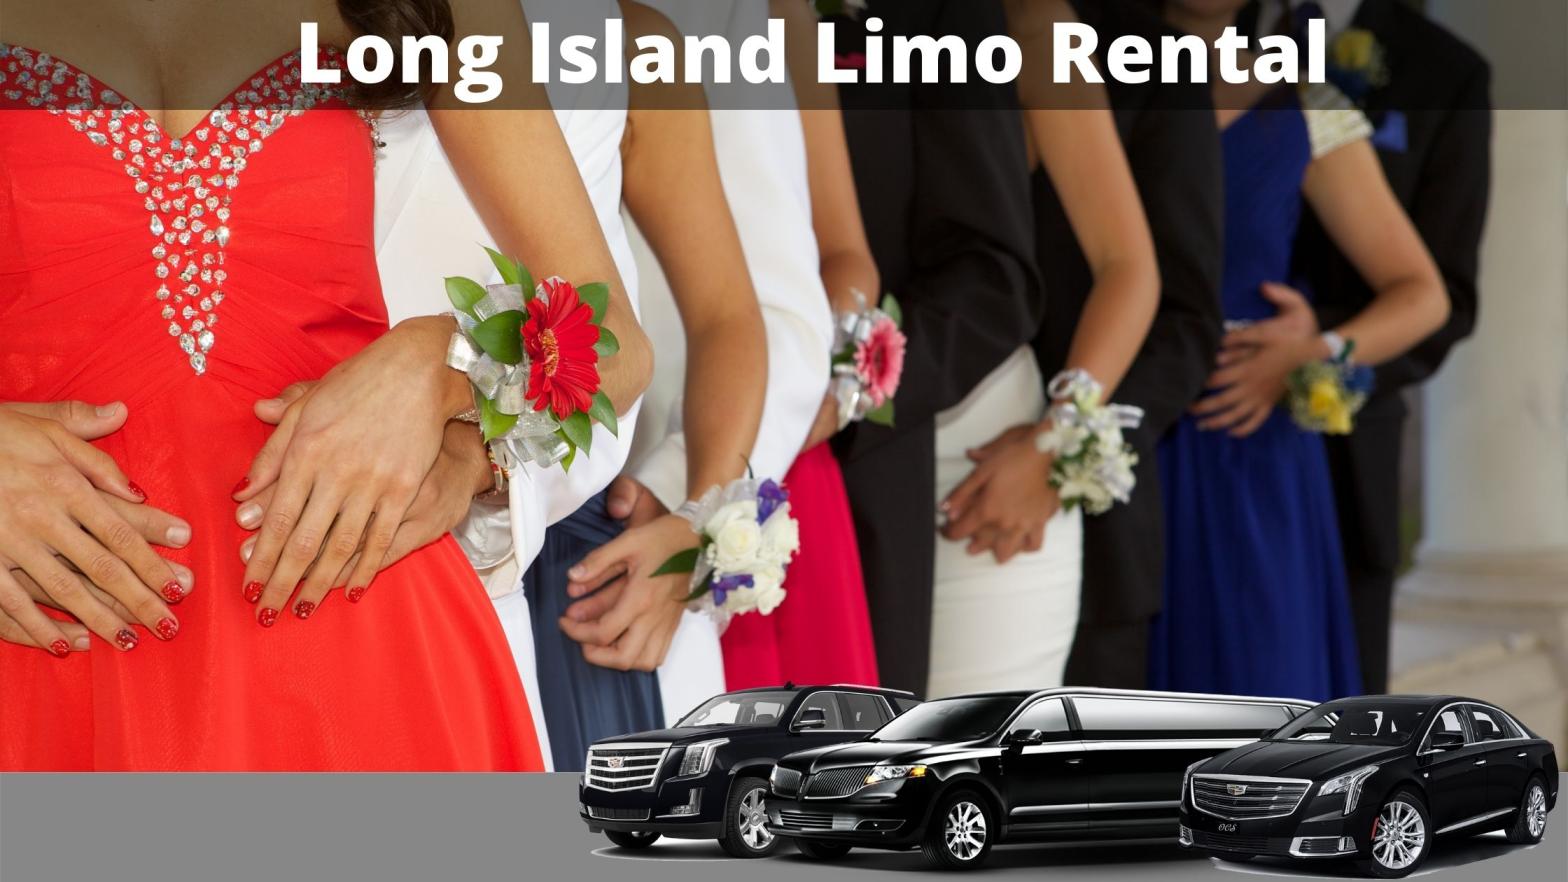 Party Bus Rental for Prom and Homecoming on Long Island